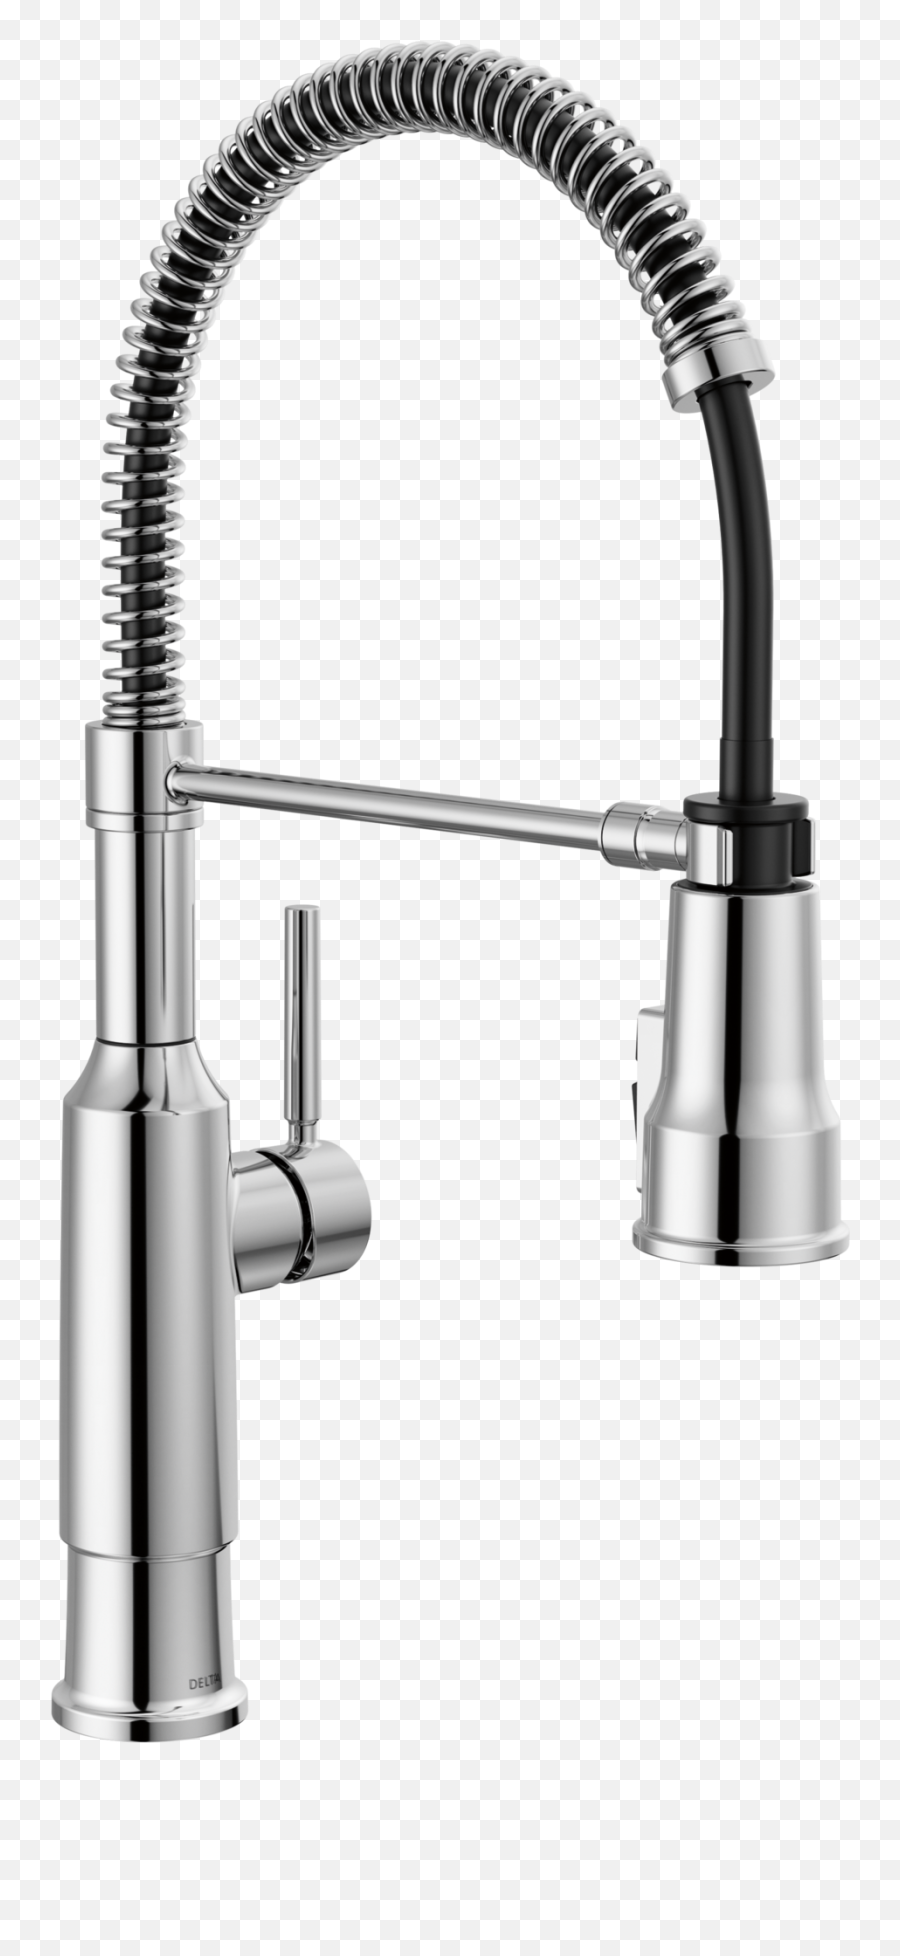 Single - Handle Pulldown Kitchen Faucet With Shieldspray Technology Delta Antoni Gpm Single Handle Pull Down Pre Rinse Kitchen Faucet With Magnetic Docking Spray Head Model 18803 Dst Png,St Theodora Icon